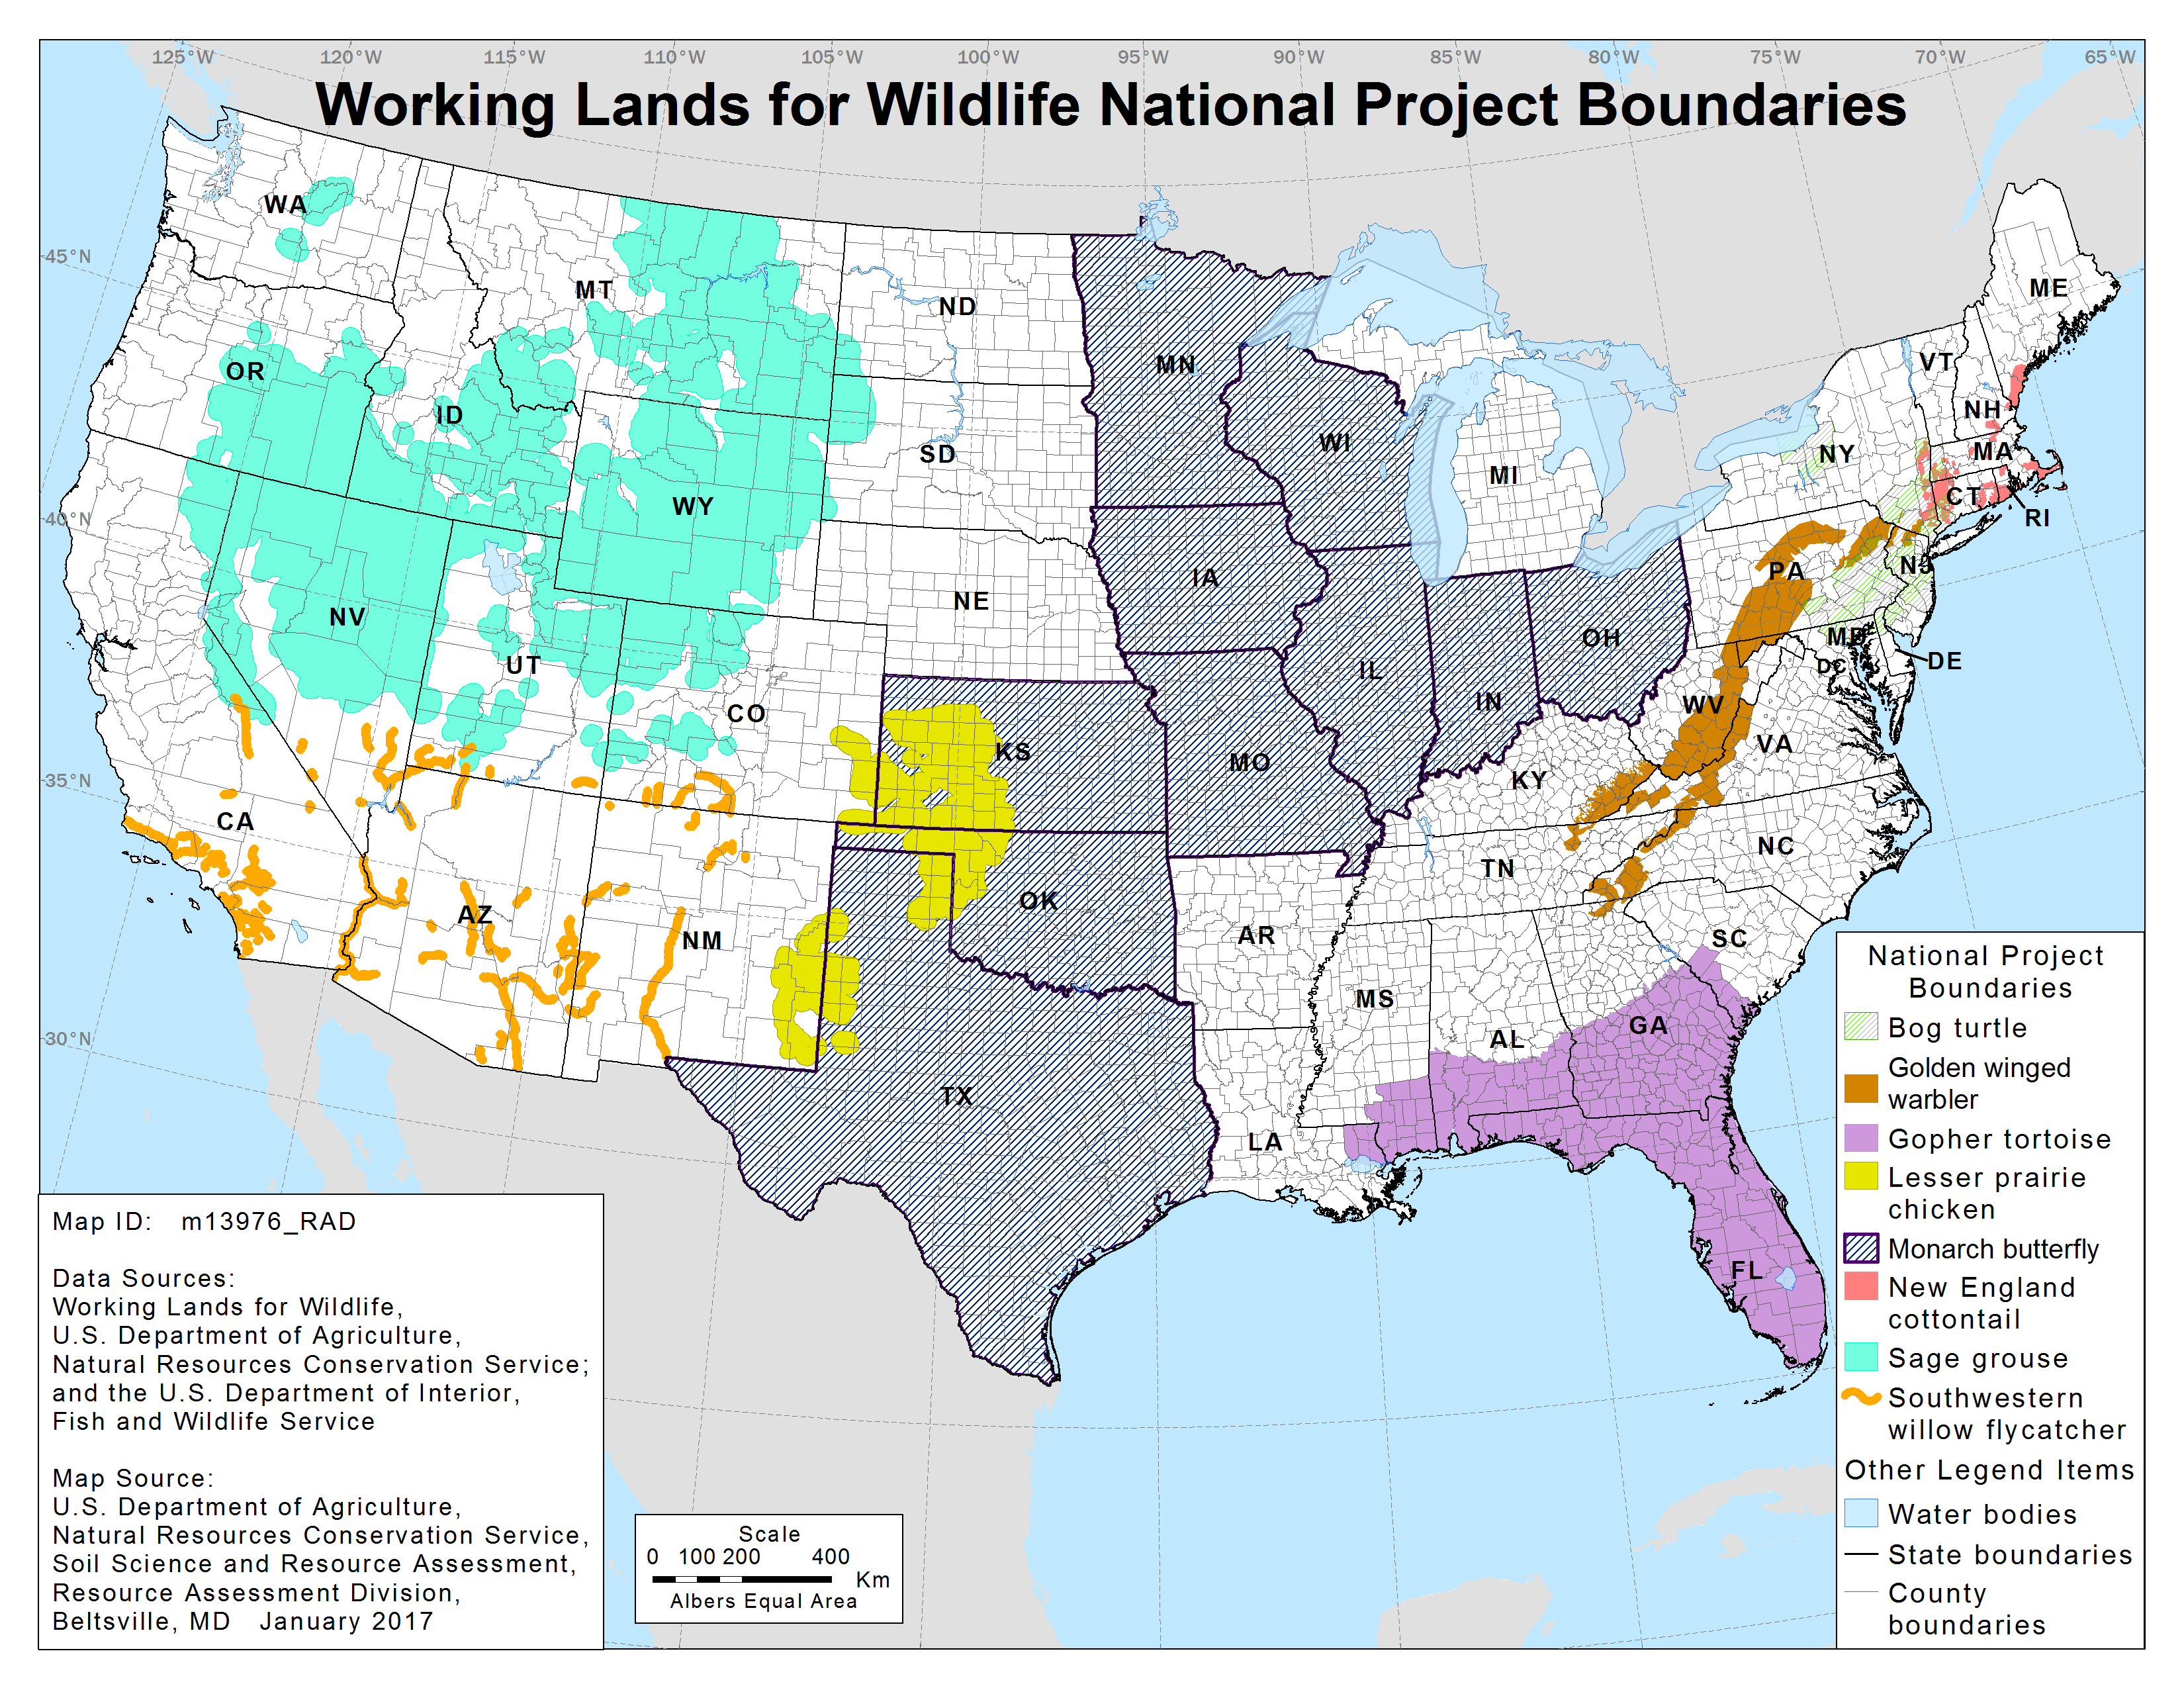 NEW Working Lands for Wildlife National project bounderies